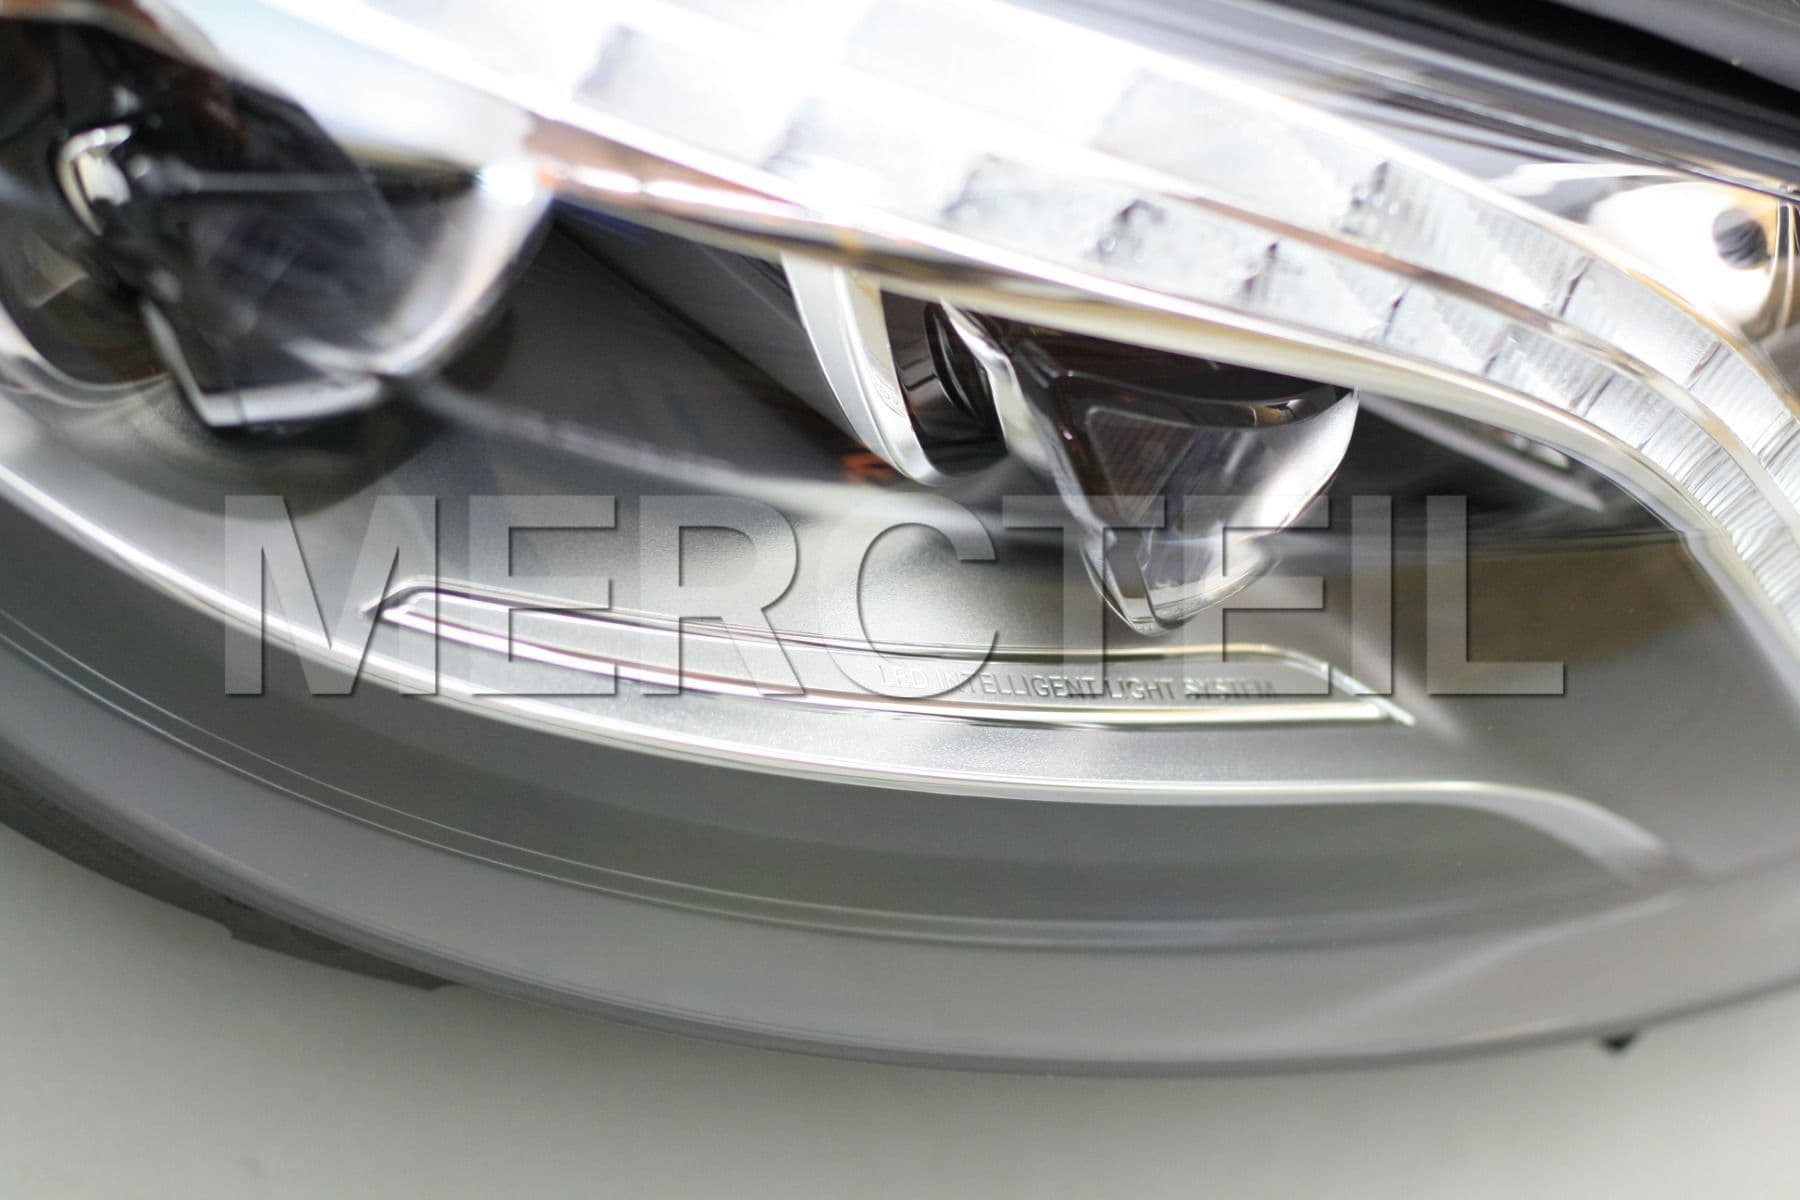 Full Dynamic LED Headlights for S Class W222 (part number: 	
A2228700789)